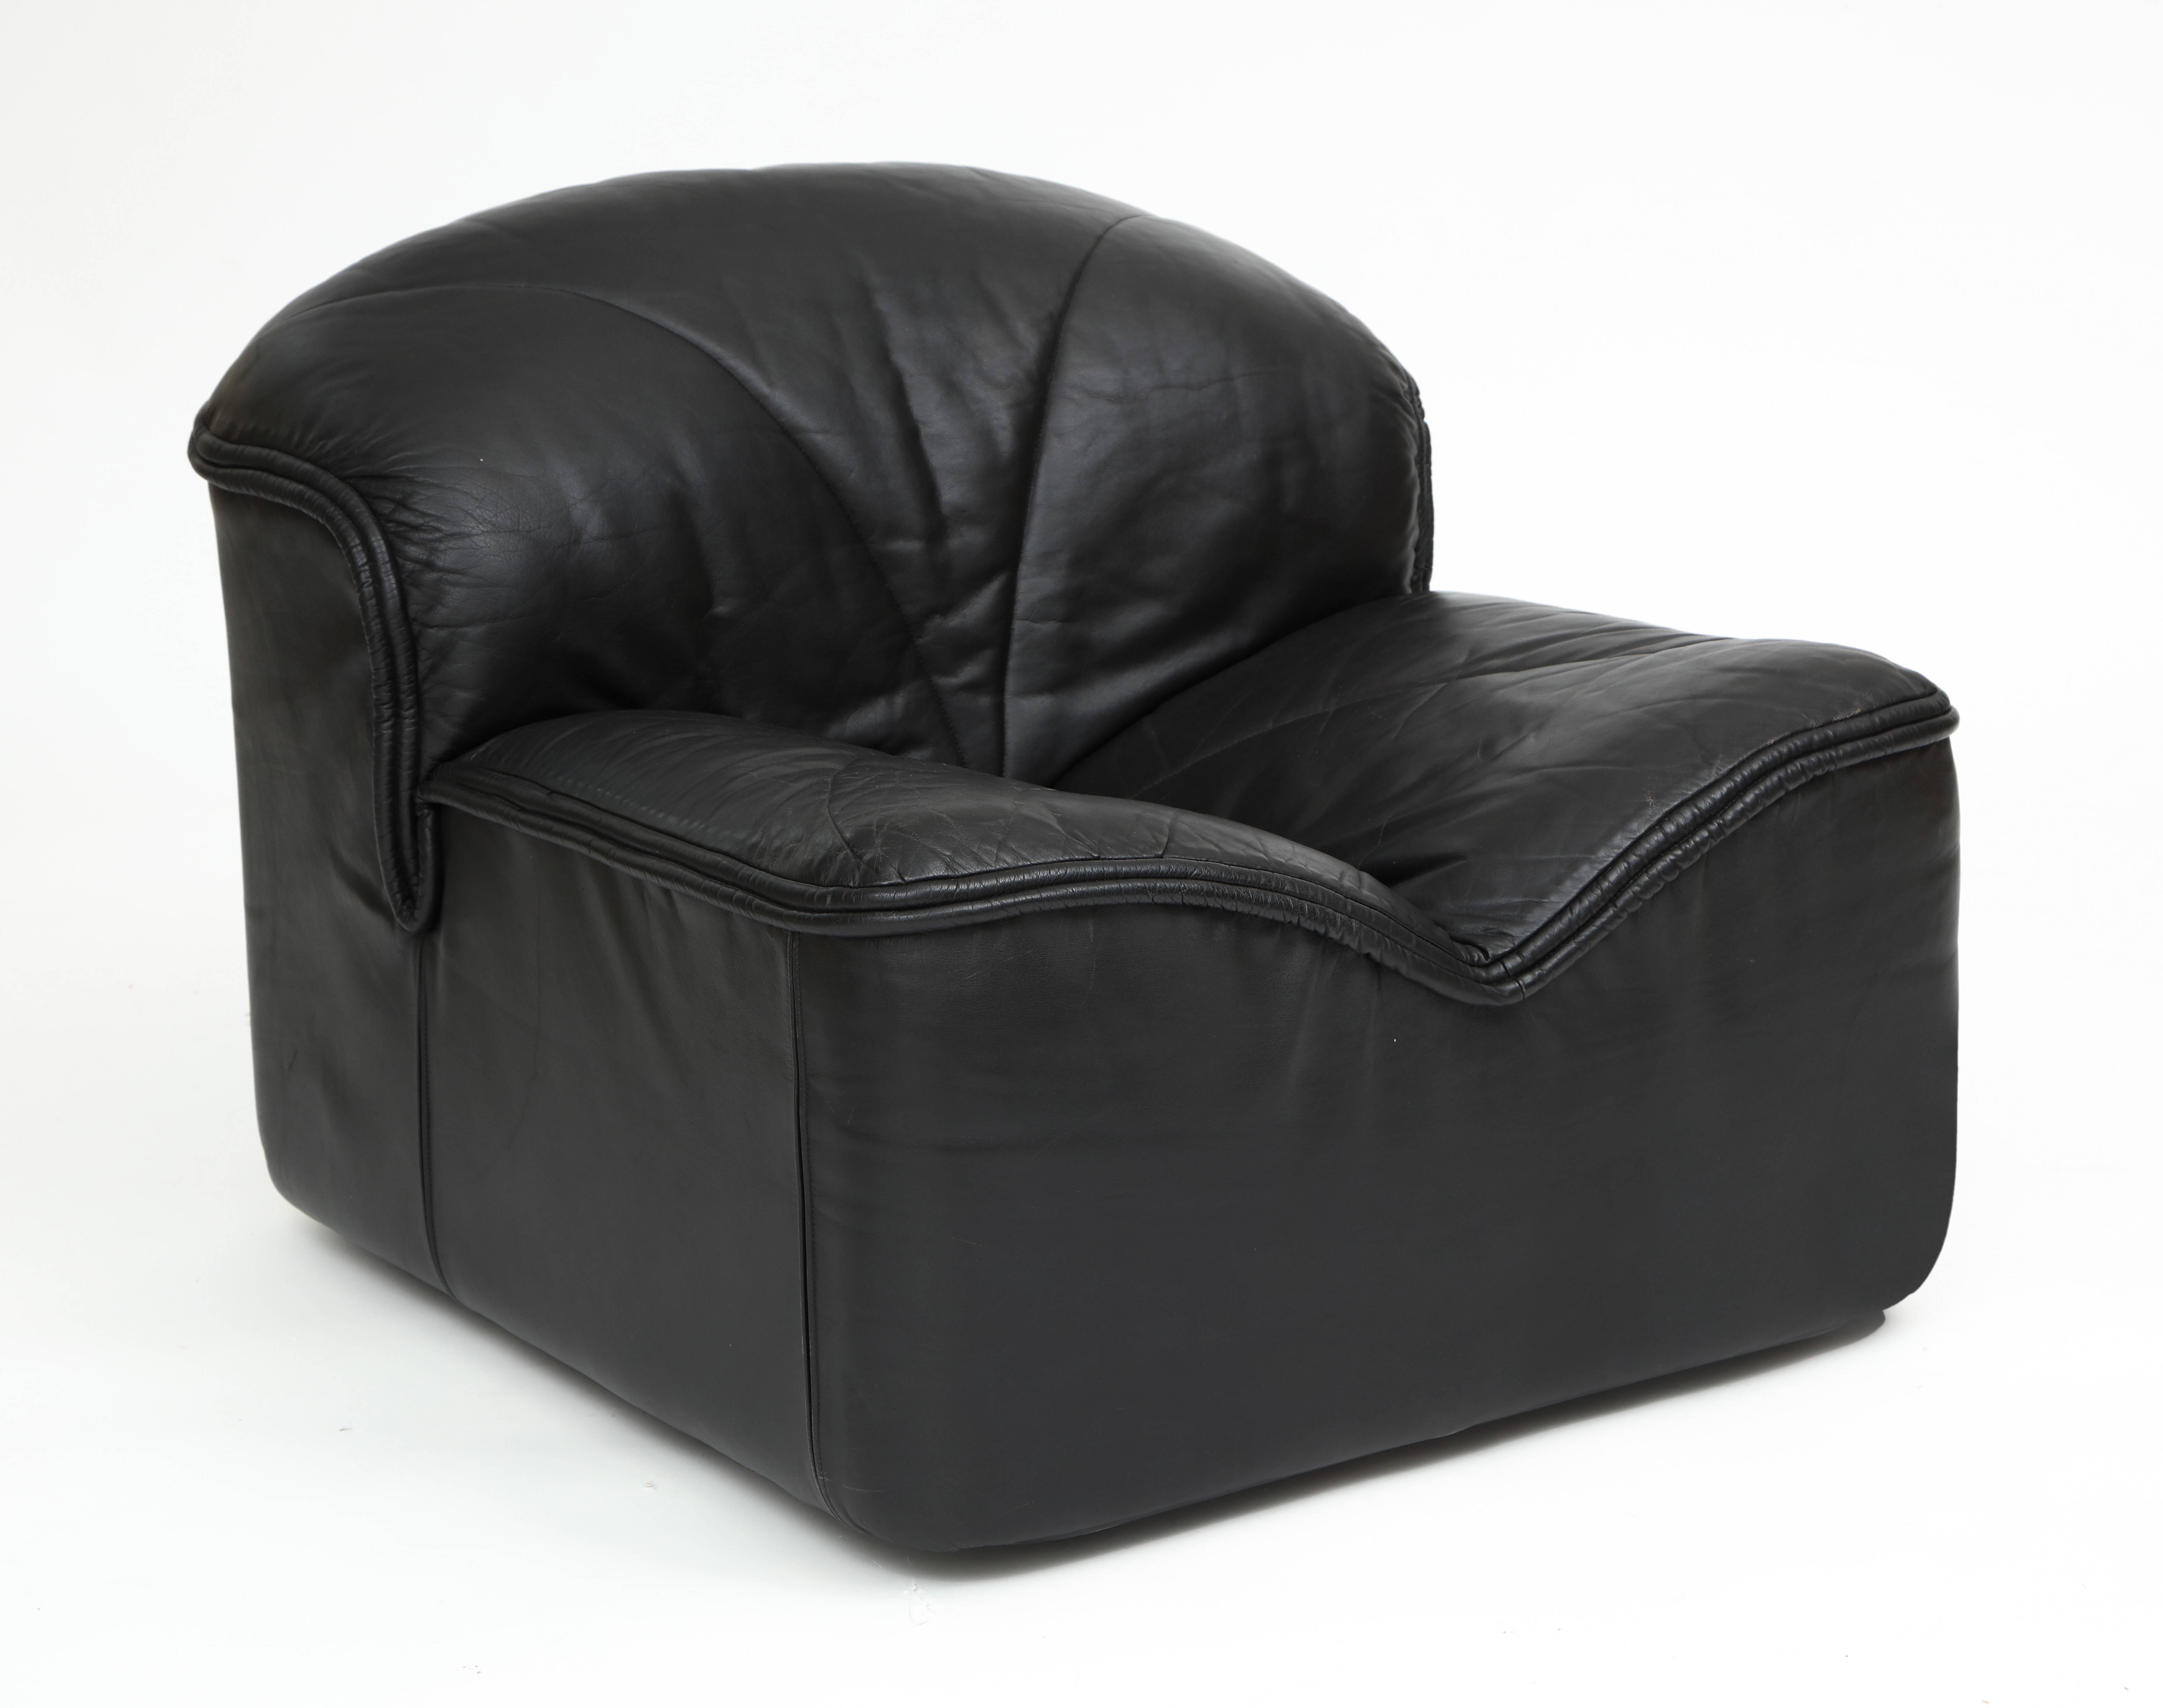 i4 Mariani pace black leather pair of lounge chairs, 1970s-1980s

These chairs are made by Italian company i4 Mariani. The leather is in overall very good condition as seen in the photos. They are also very comfortable.
Super cool lounge chairs